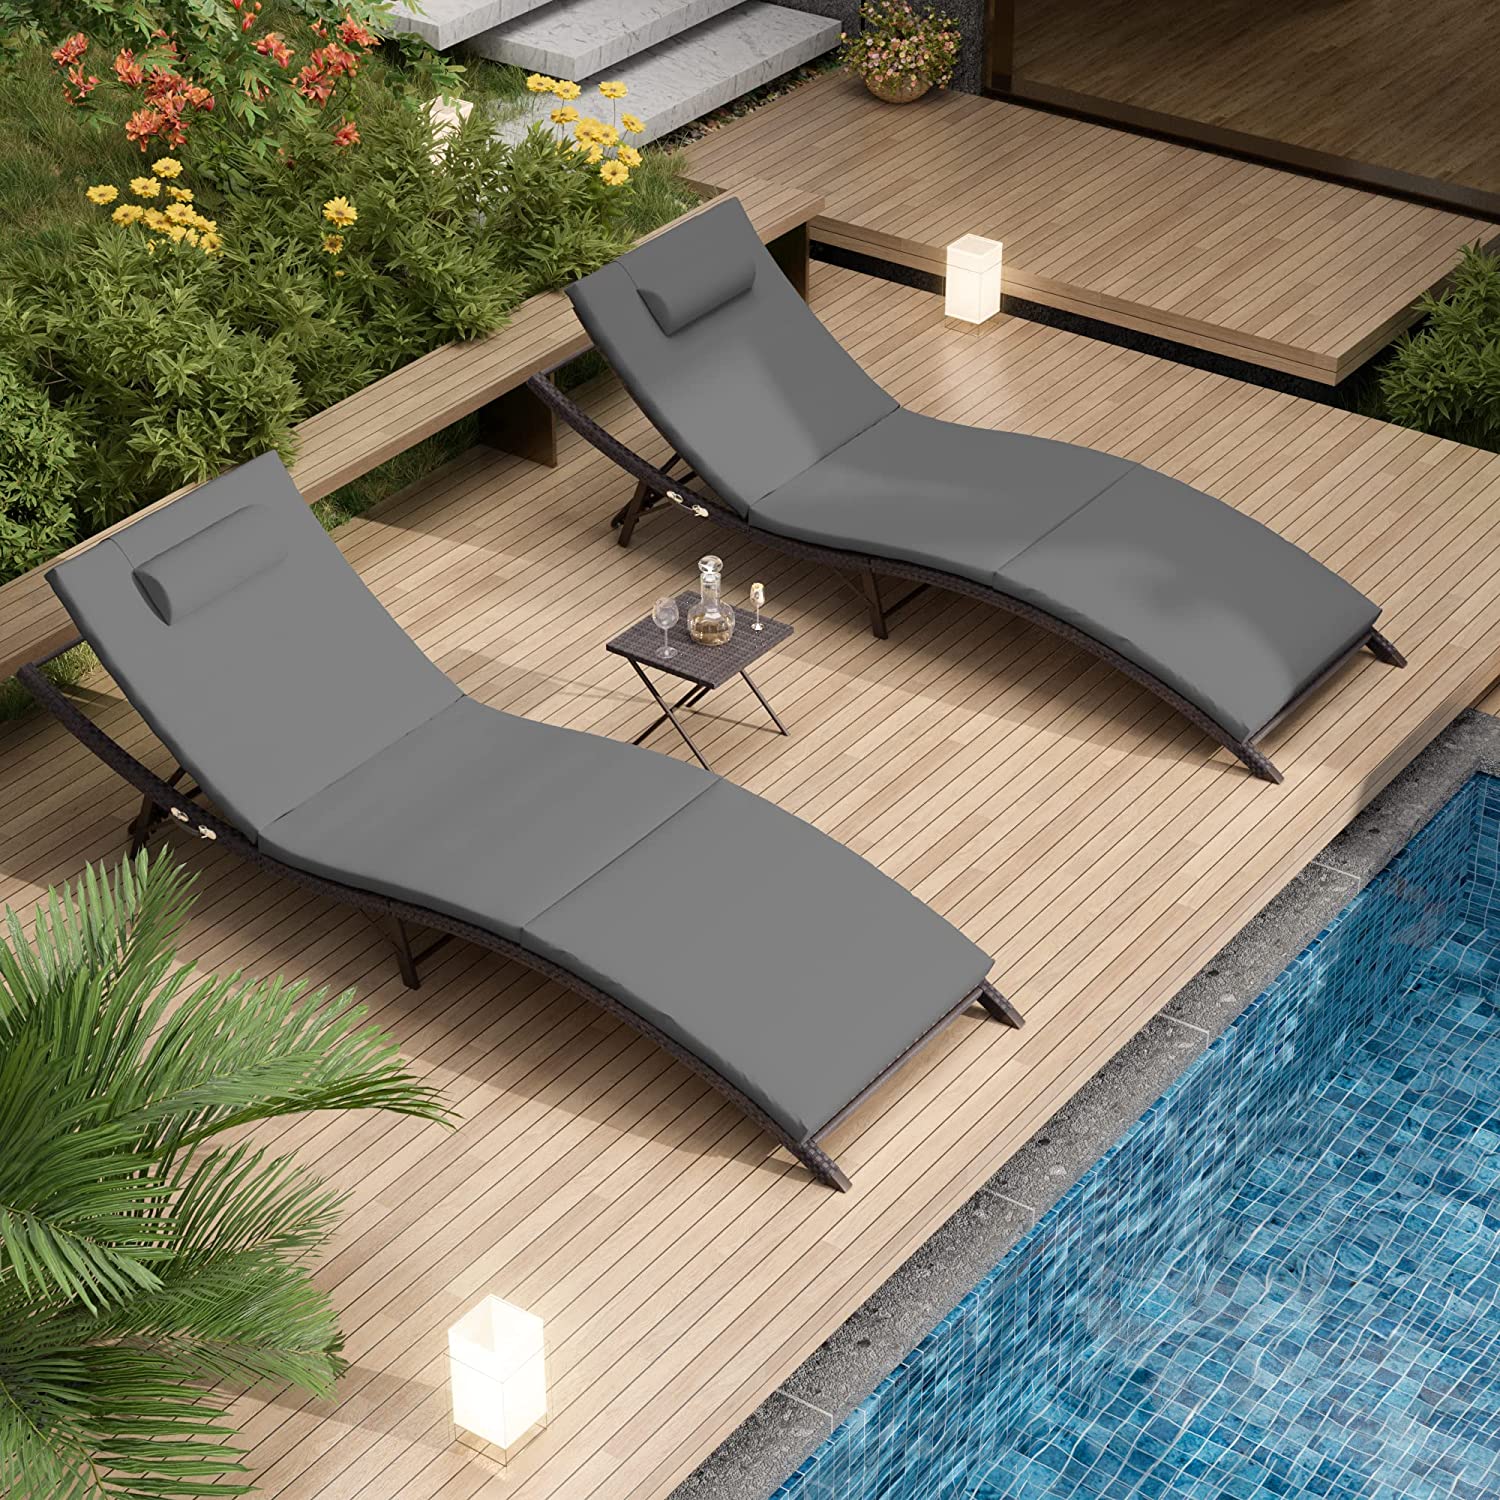 Kullavik Patio Chaise Lounge Set 3 Pieces Outdoor Lounge Chair Outdoor Wicker Lounge Chairs with Table Folding Chaise Lounger for Poolside Backyard Porch,Grey - image 1 of 7